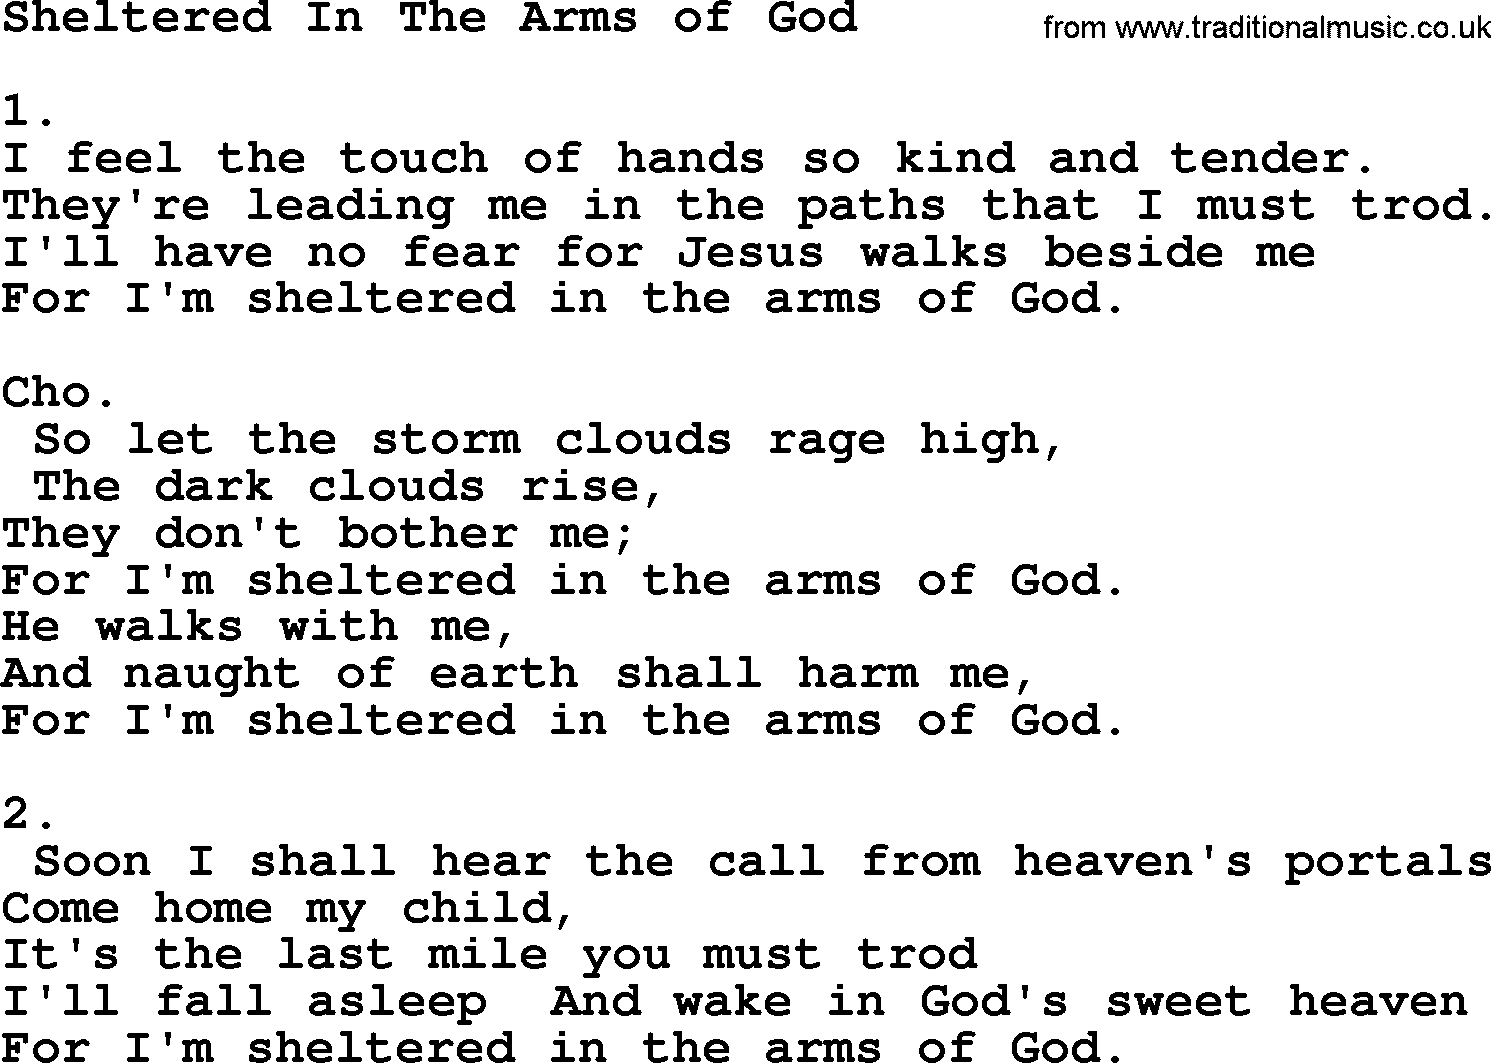 Apostolic & Pentecostal Hymns and Songs, Hymn: Sheltered In The Arms of God lyrics and PDF